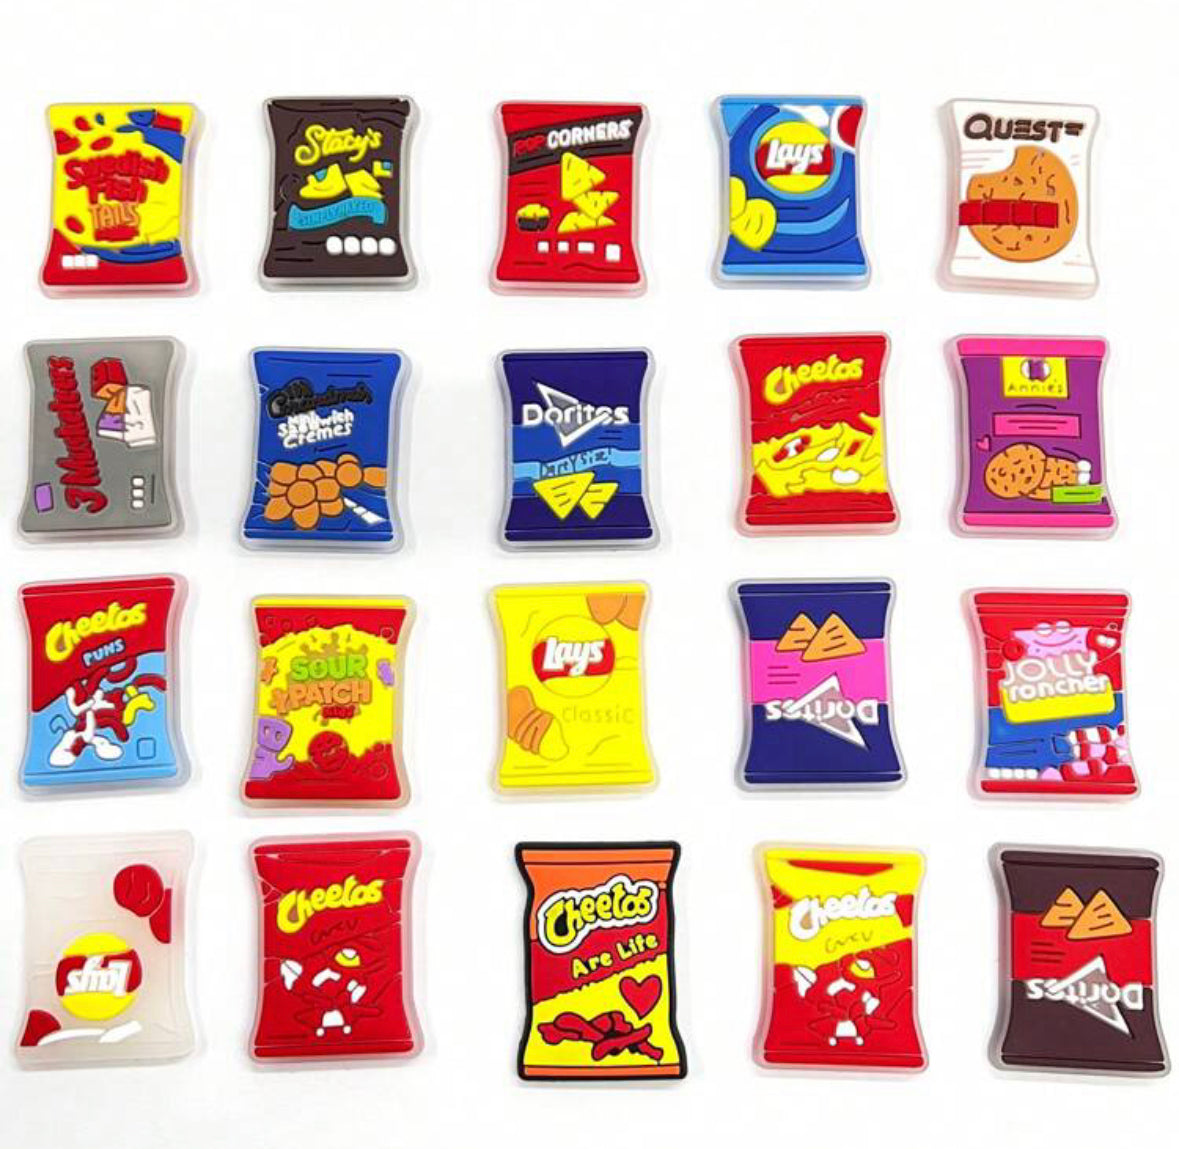 20 PIECES OF POTATO CHIPS SERIES. PINS